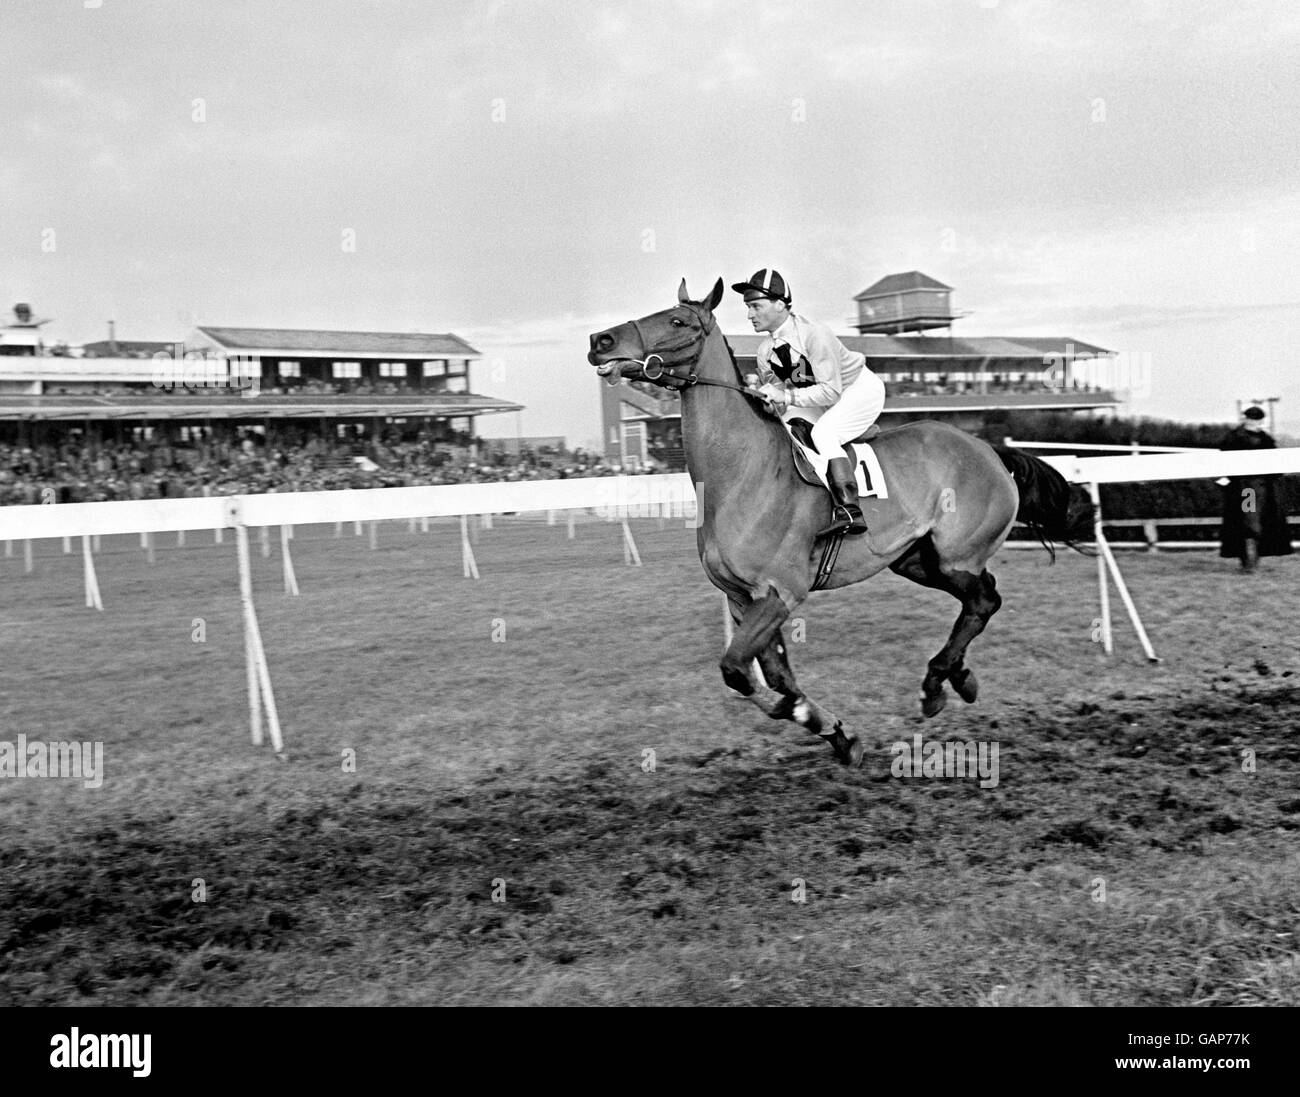 Imposant, seen here ridden by John Ciechanowski, who half owned the animal, one of the fench entries for the Grand National Steeplechase to be held at Aintree. The second half of the horse was owned by R. Couetil and trained by J O'Donoghue. Stock Photo